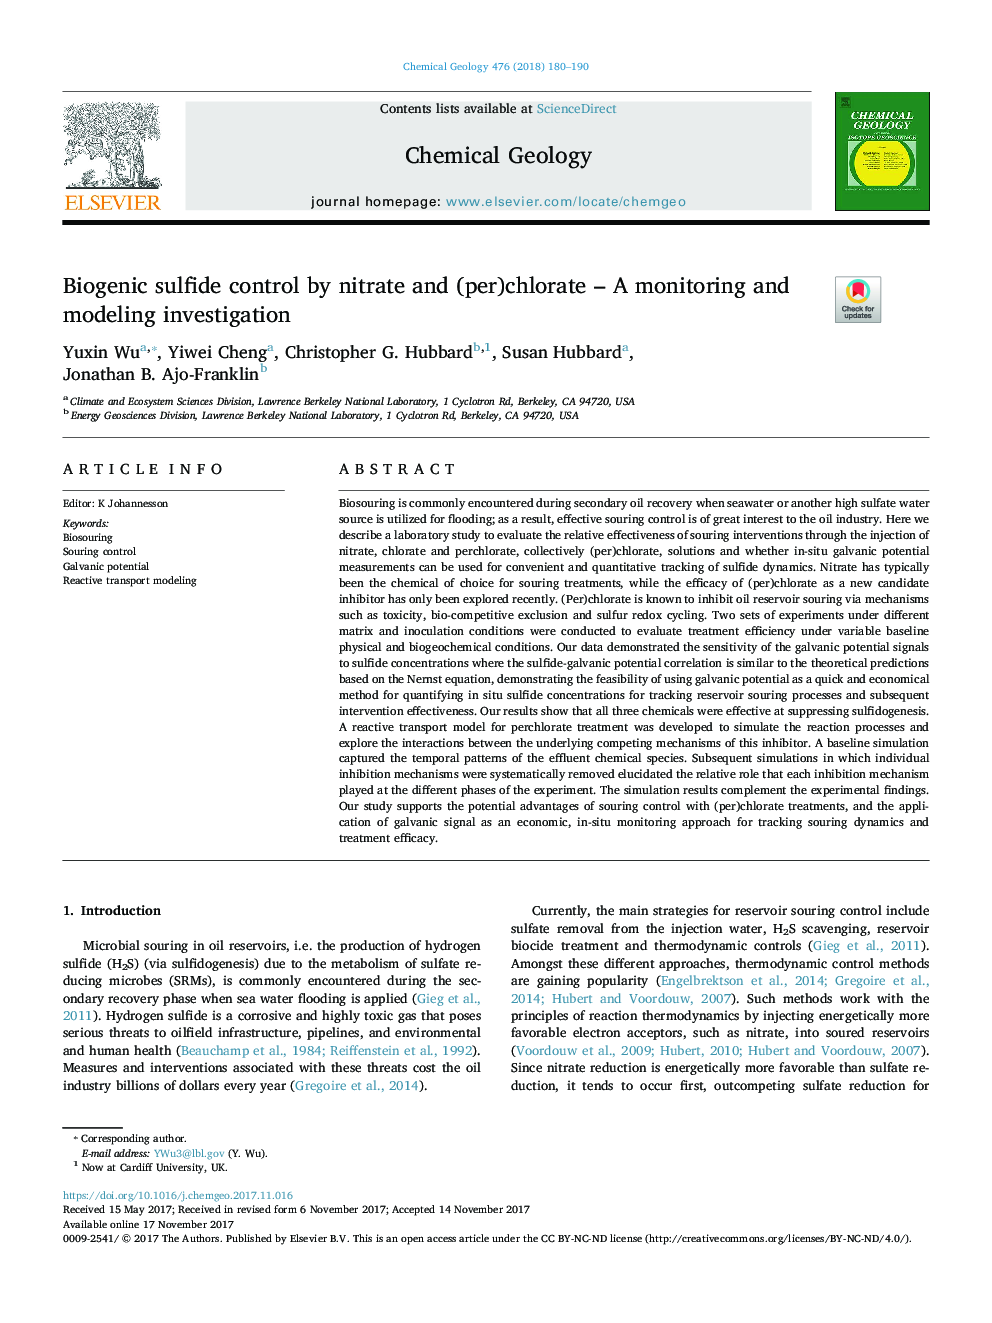 Biogenic sulfide control by nitrate and (per)chlorate - A monitoring and modeling investigation